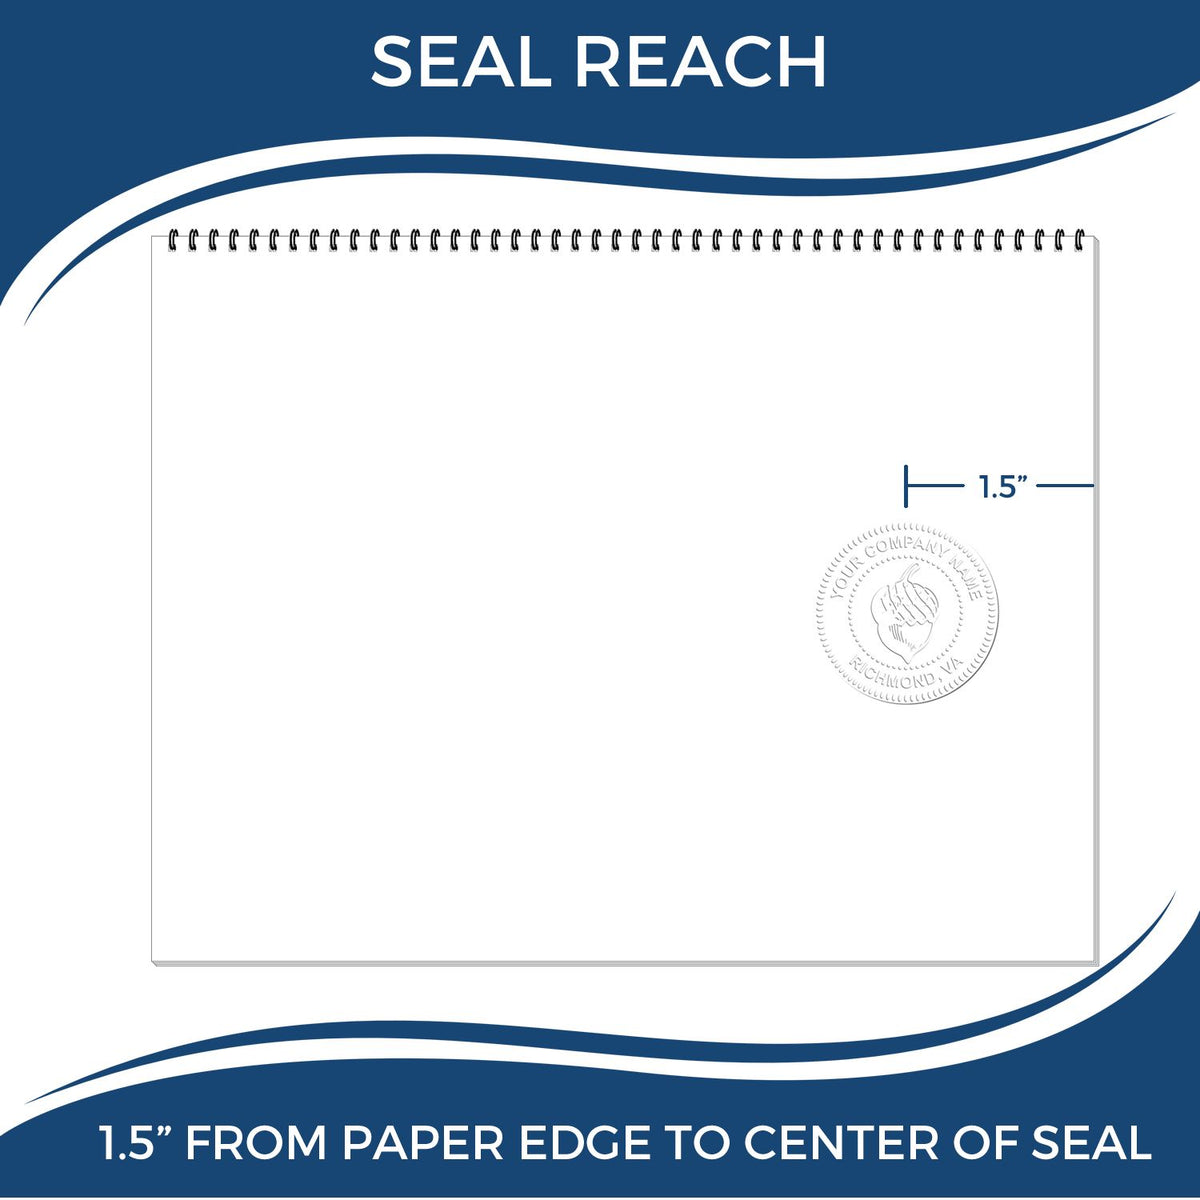 An infographic showing the seal reach which is represented by a ruler and a miniature seal image of the Oklahoma Engineer Desk Seal